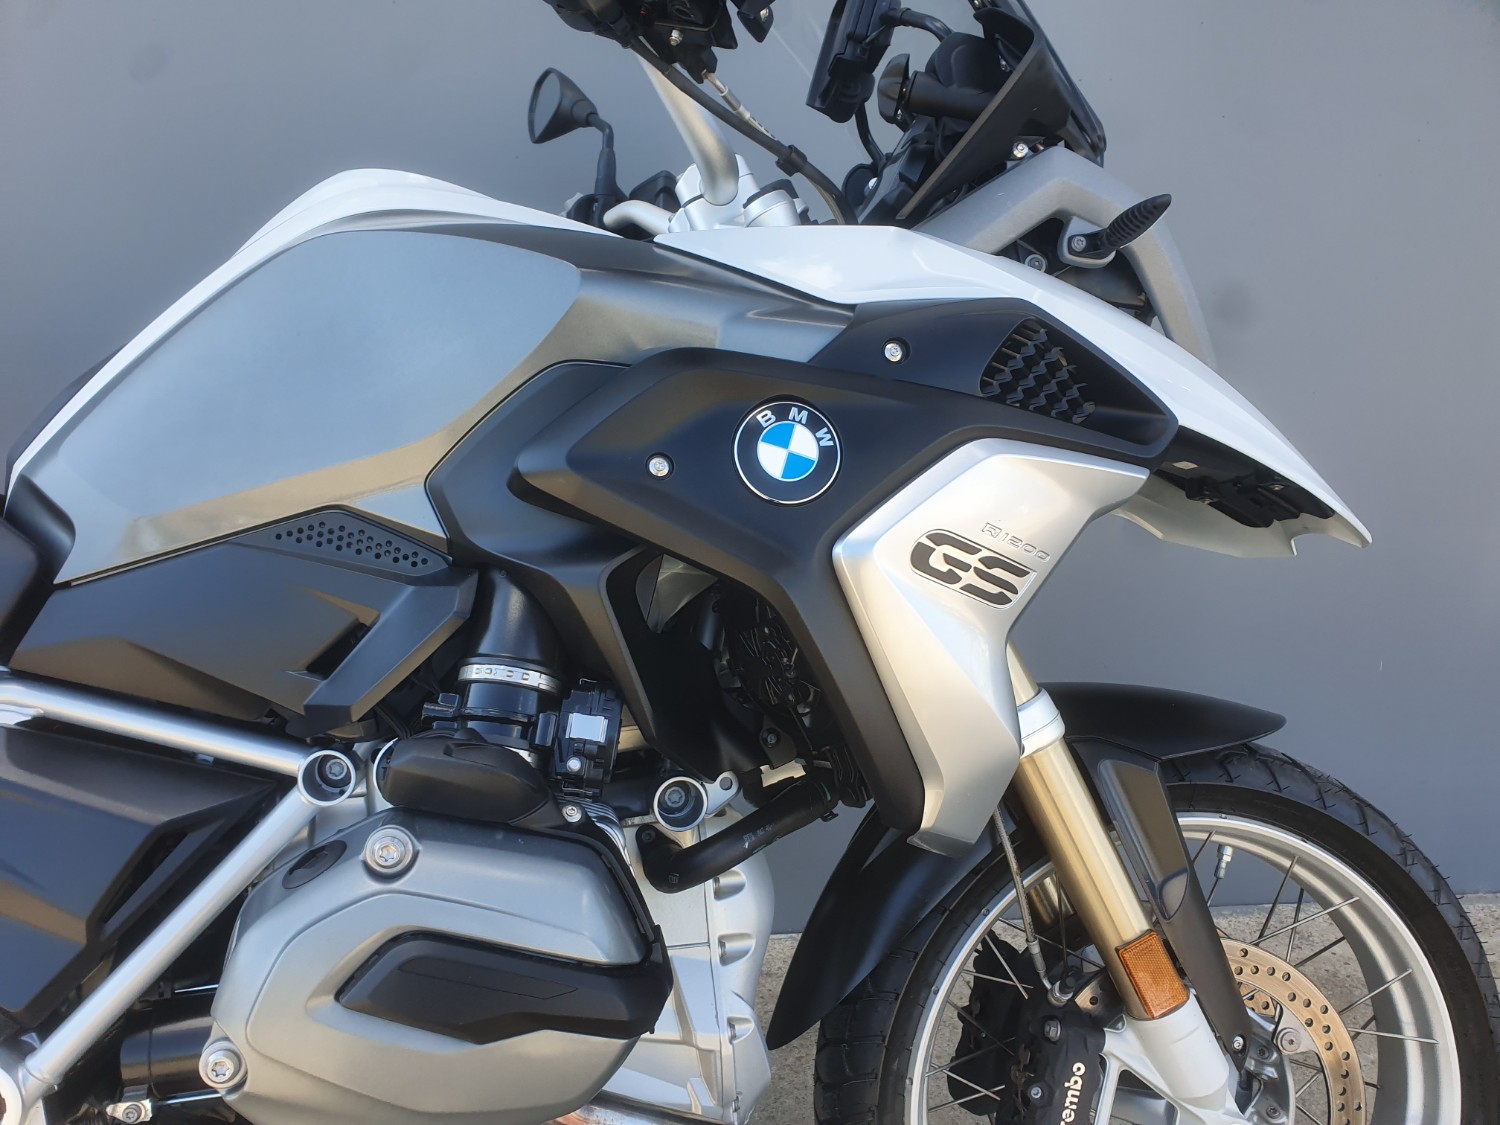 2017 BMW R 1200 GS Motorcycle Image 7